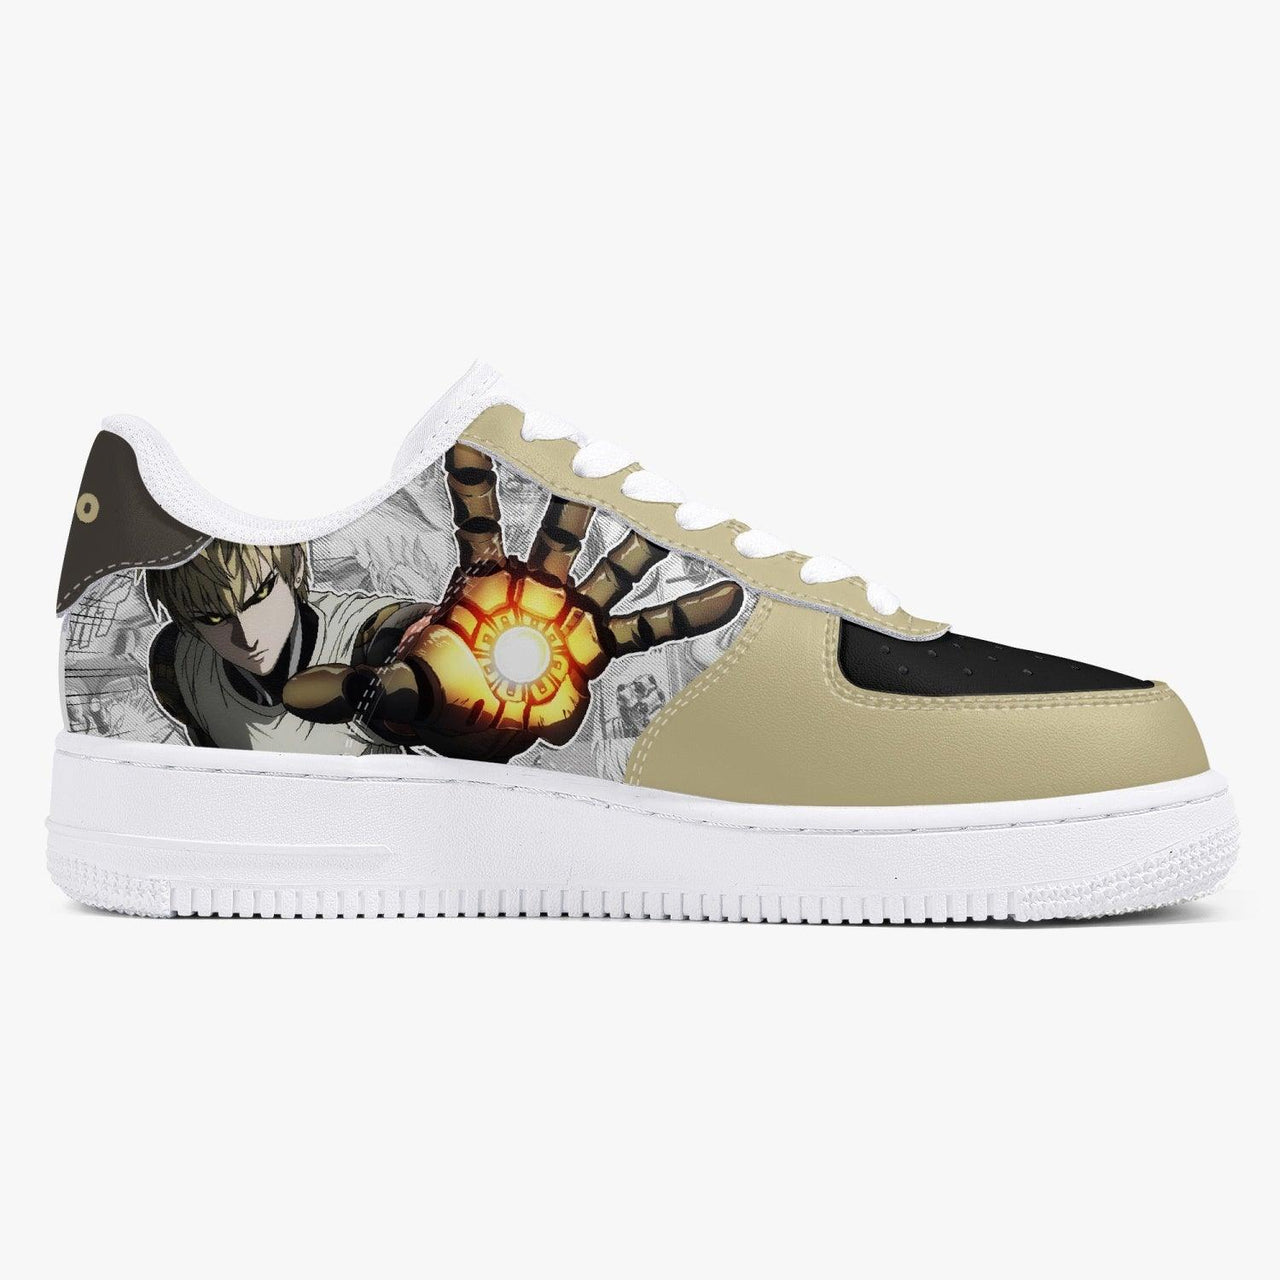 One Punch Man Genos Air F1 Anime Shoes _ One Punch Man _ Ayuko